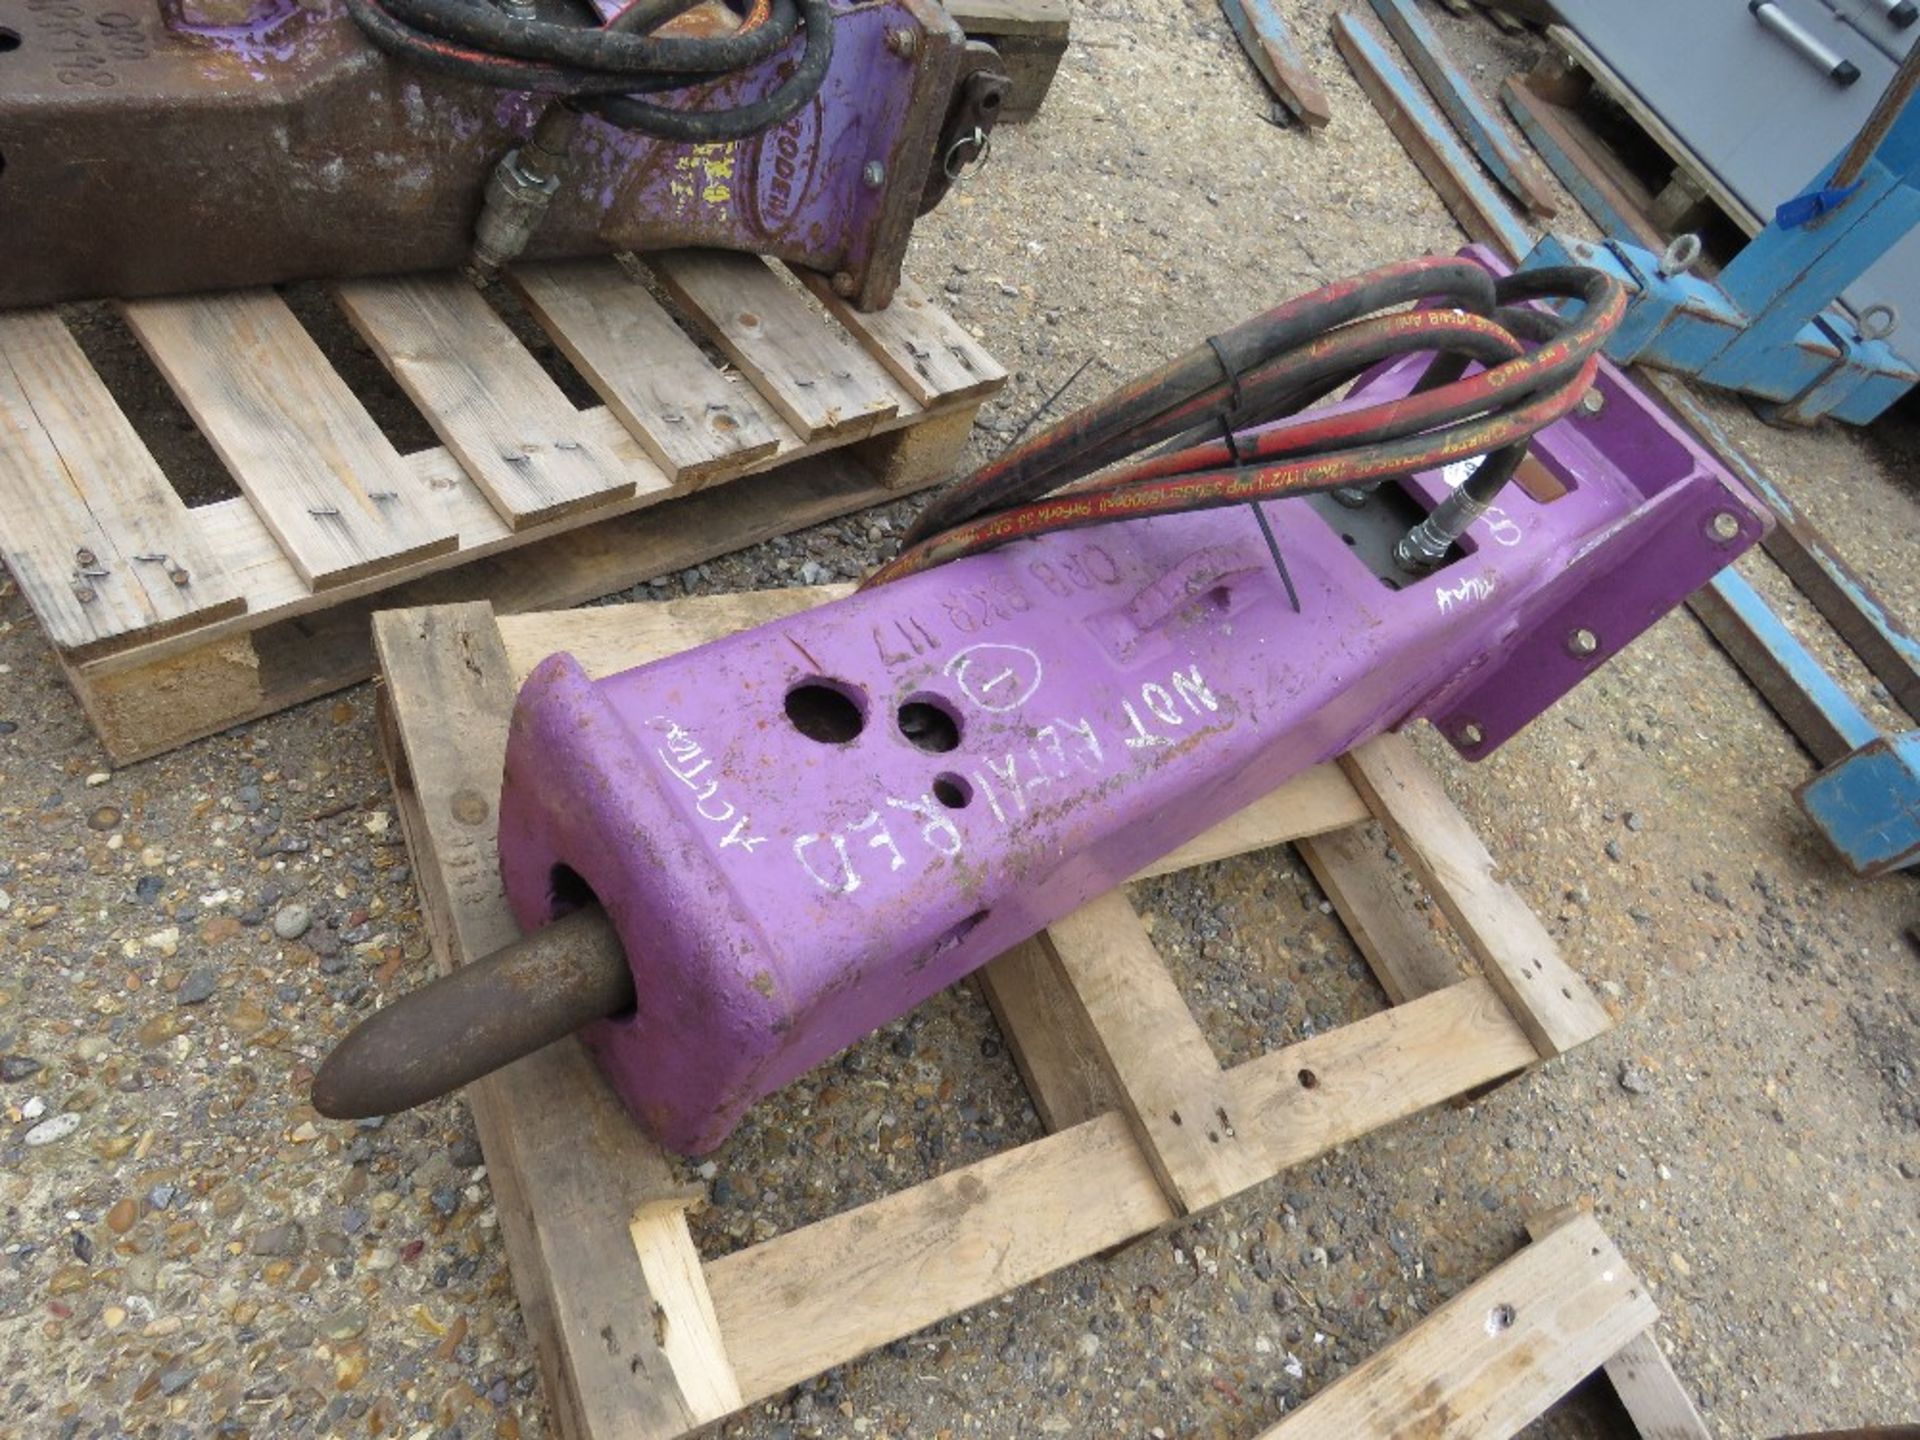 PRODEM EXCAVATOR MOUNTED HYDRAULIC BREAKER. NO HEADSTOCK. SUITABLE FOR 5-8 TONNE MACHINE APPROX. - Image 3 of 3